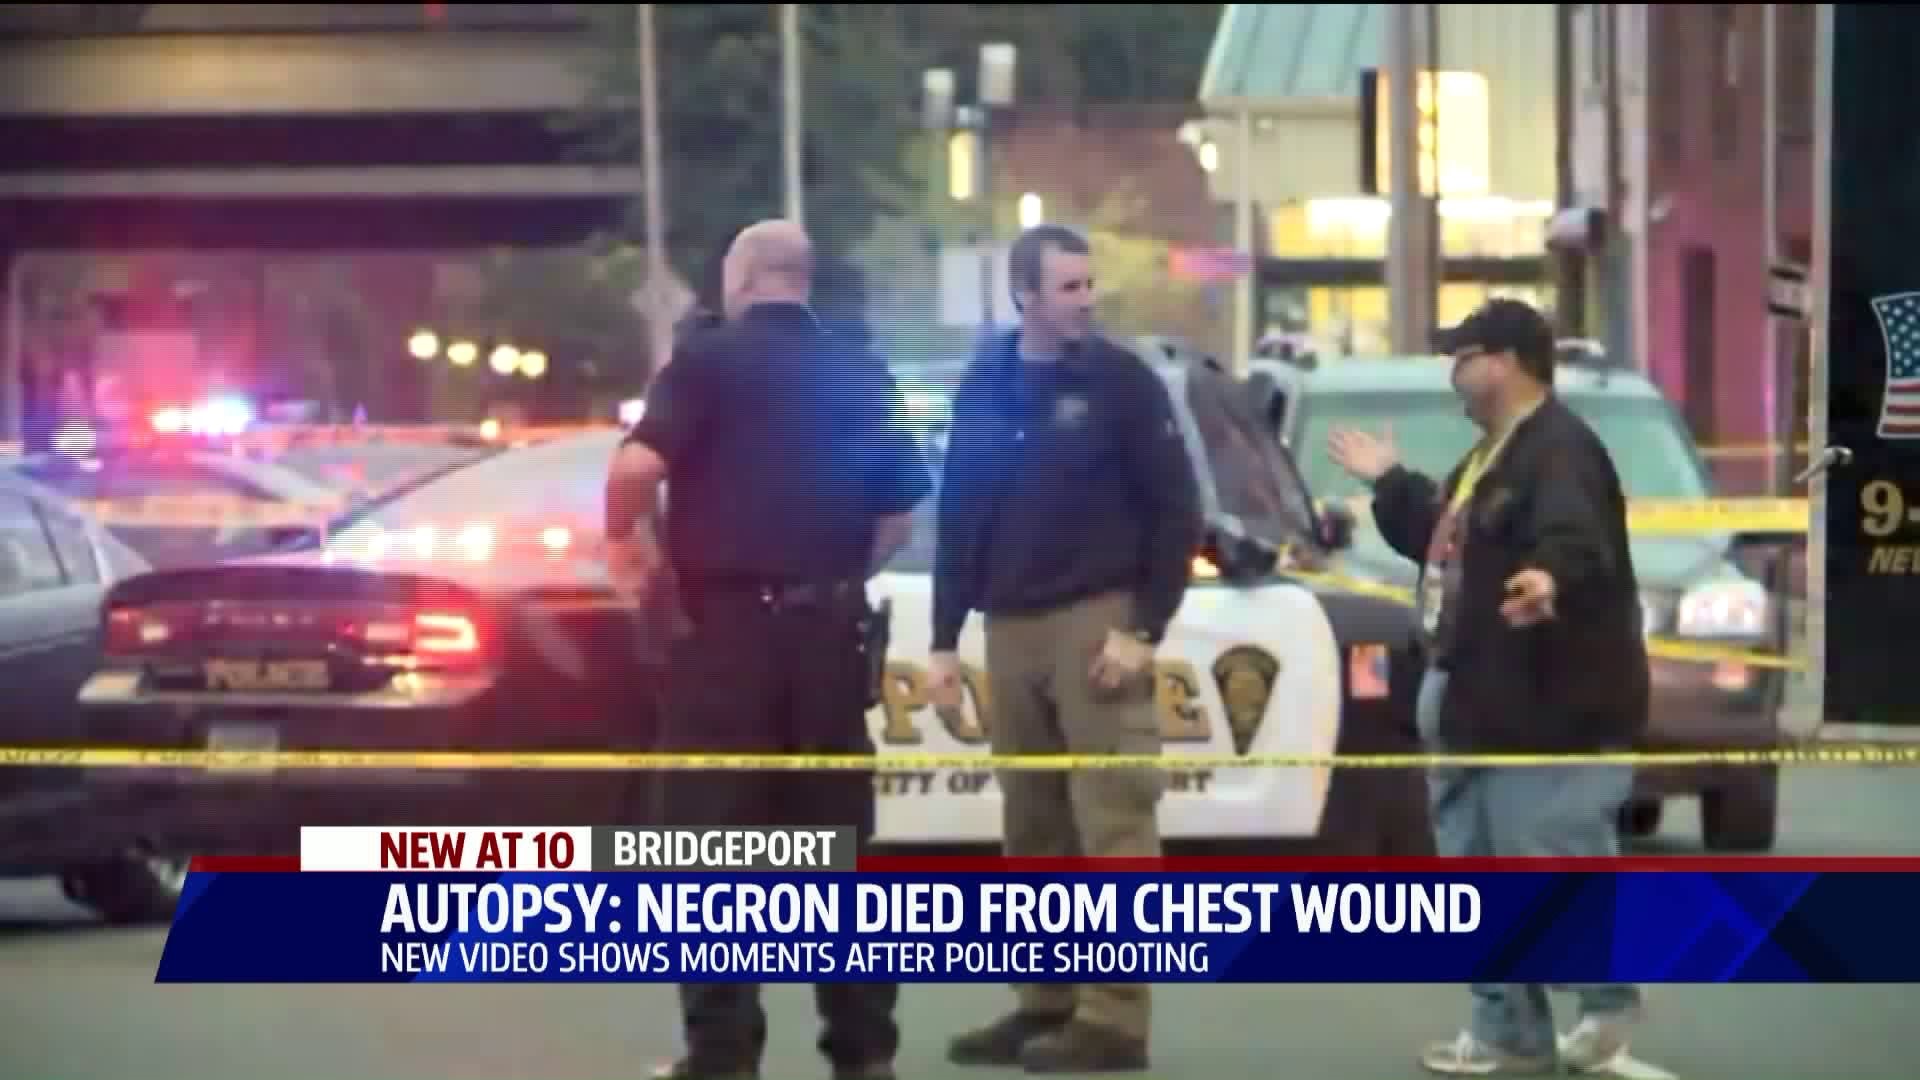 New video emerges showing moments after Bridgeport teen dies in officer-involved shooting